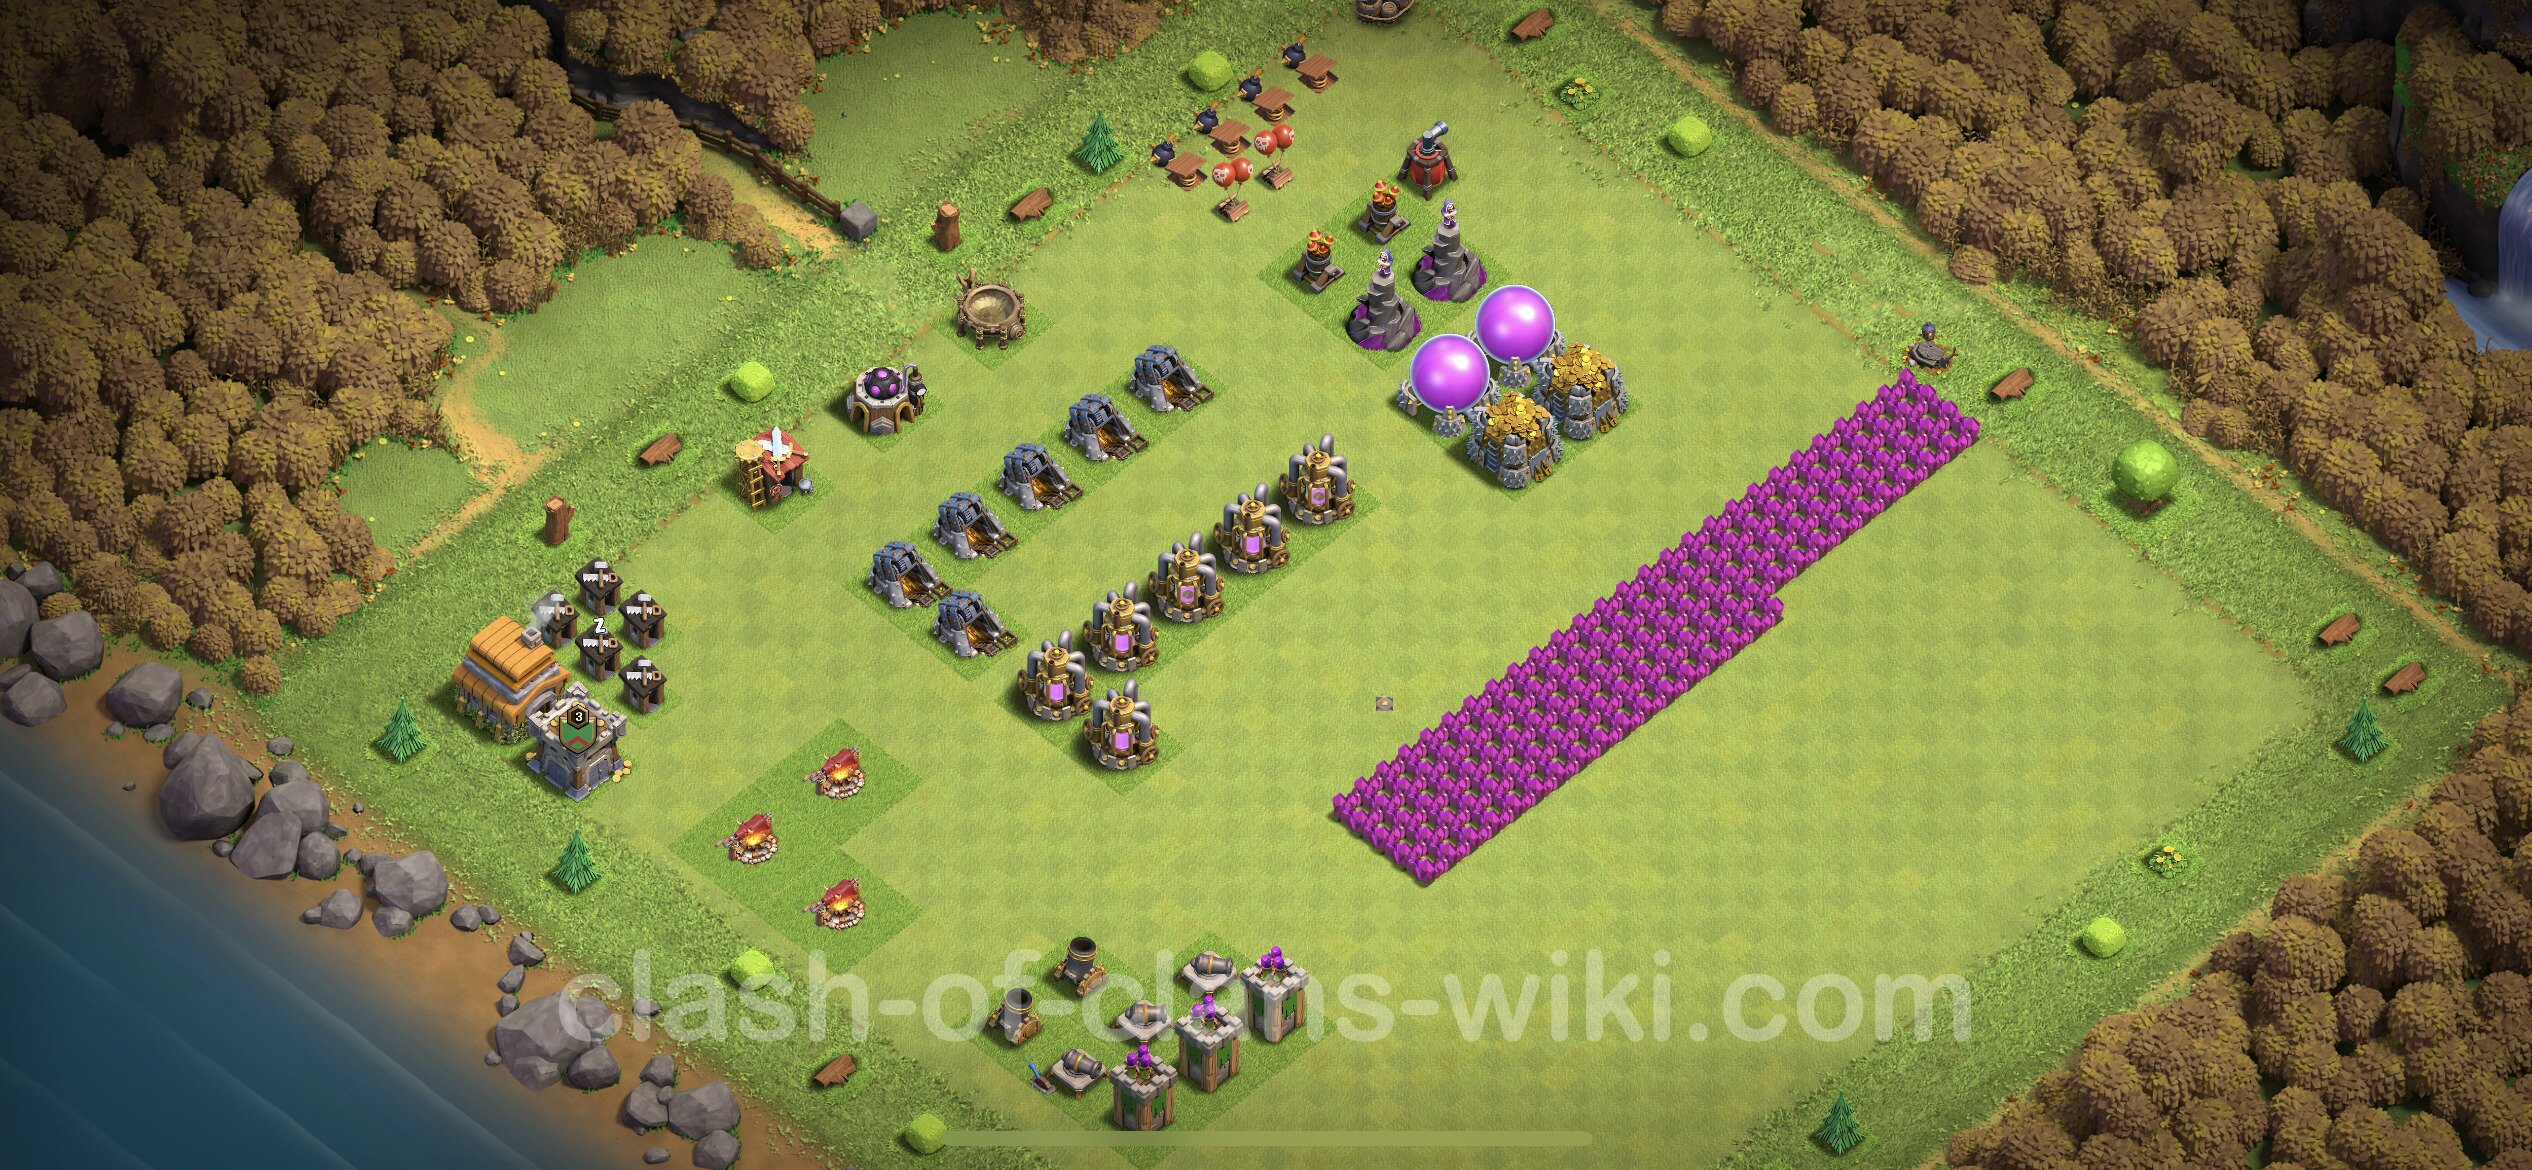 Funny Troll Base TH6 with Link - Town Hall Level 6 Art Base Copy, #2.